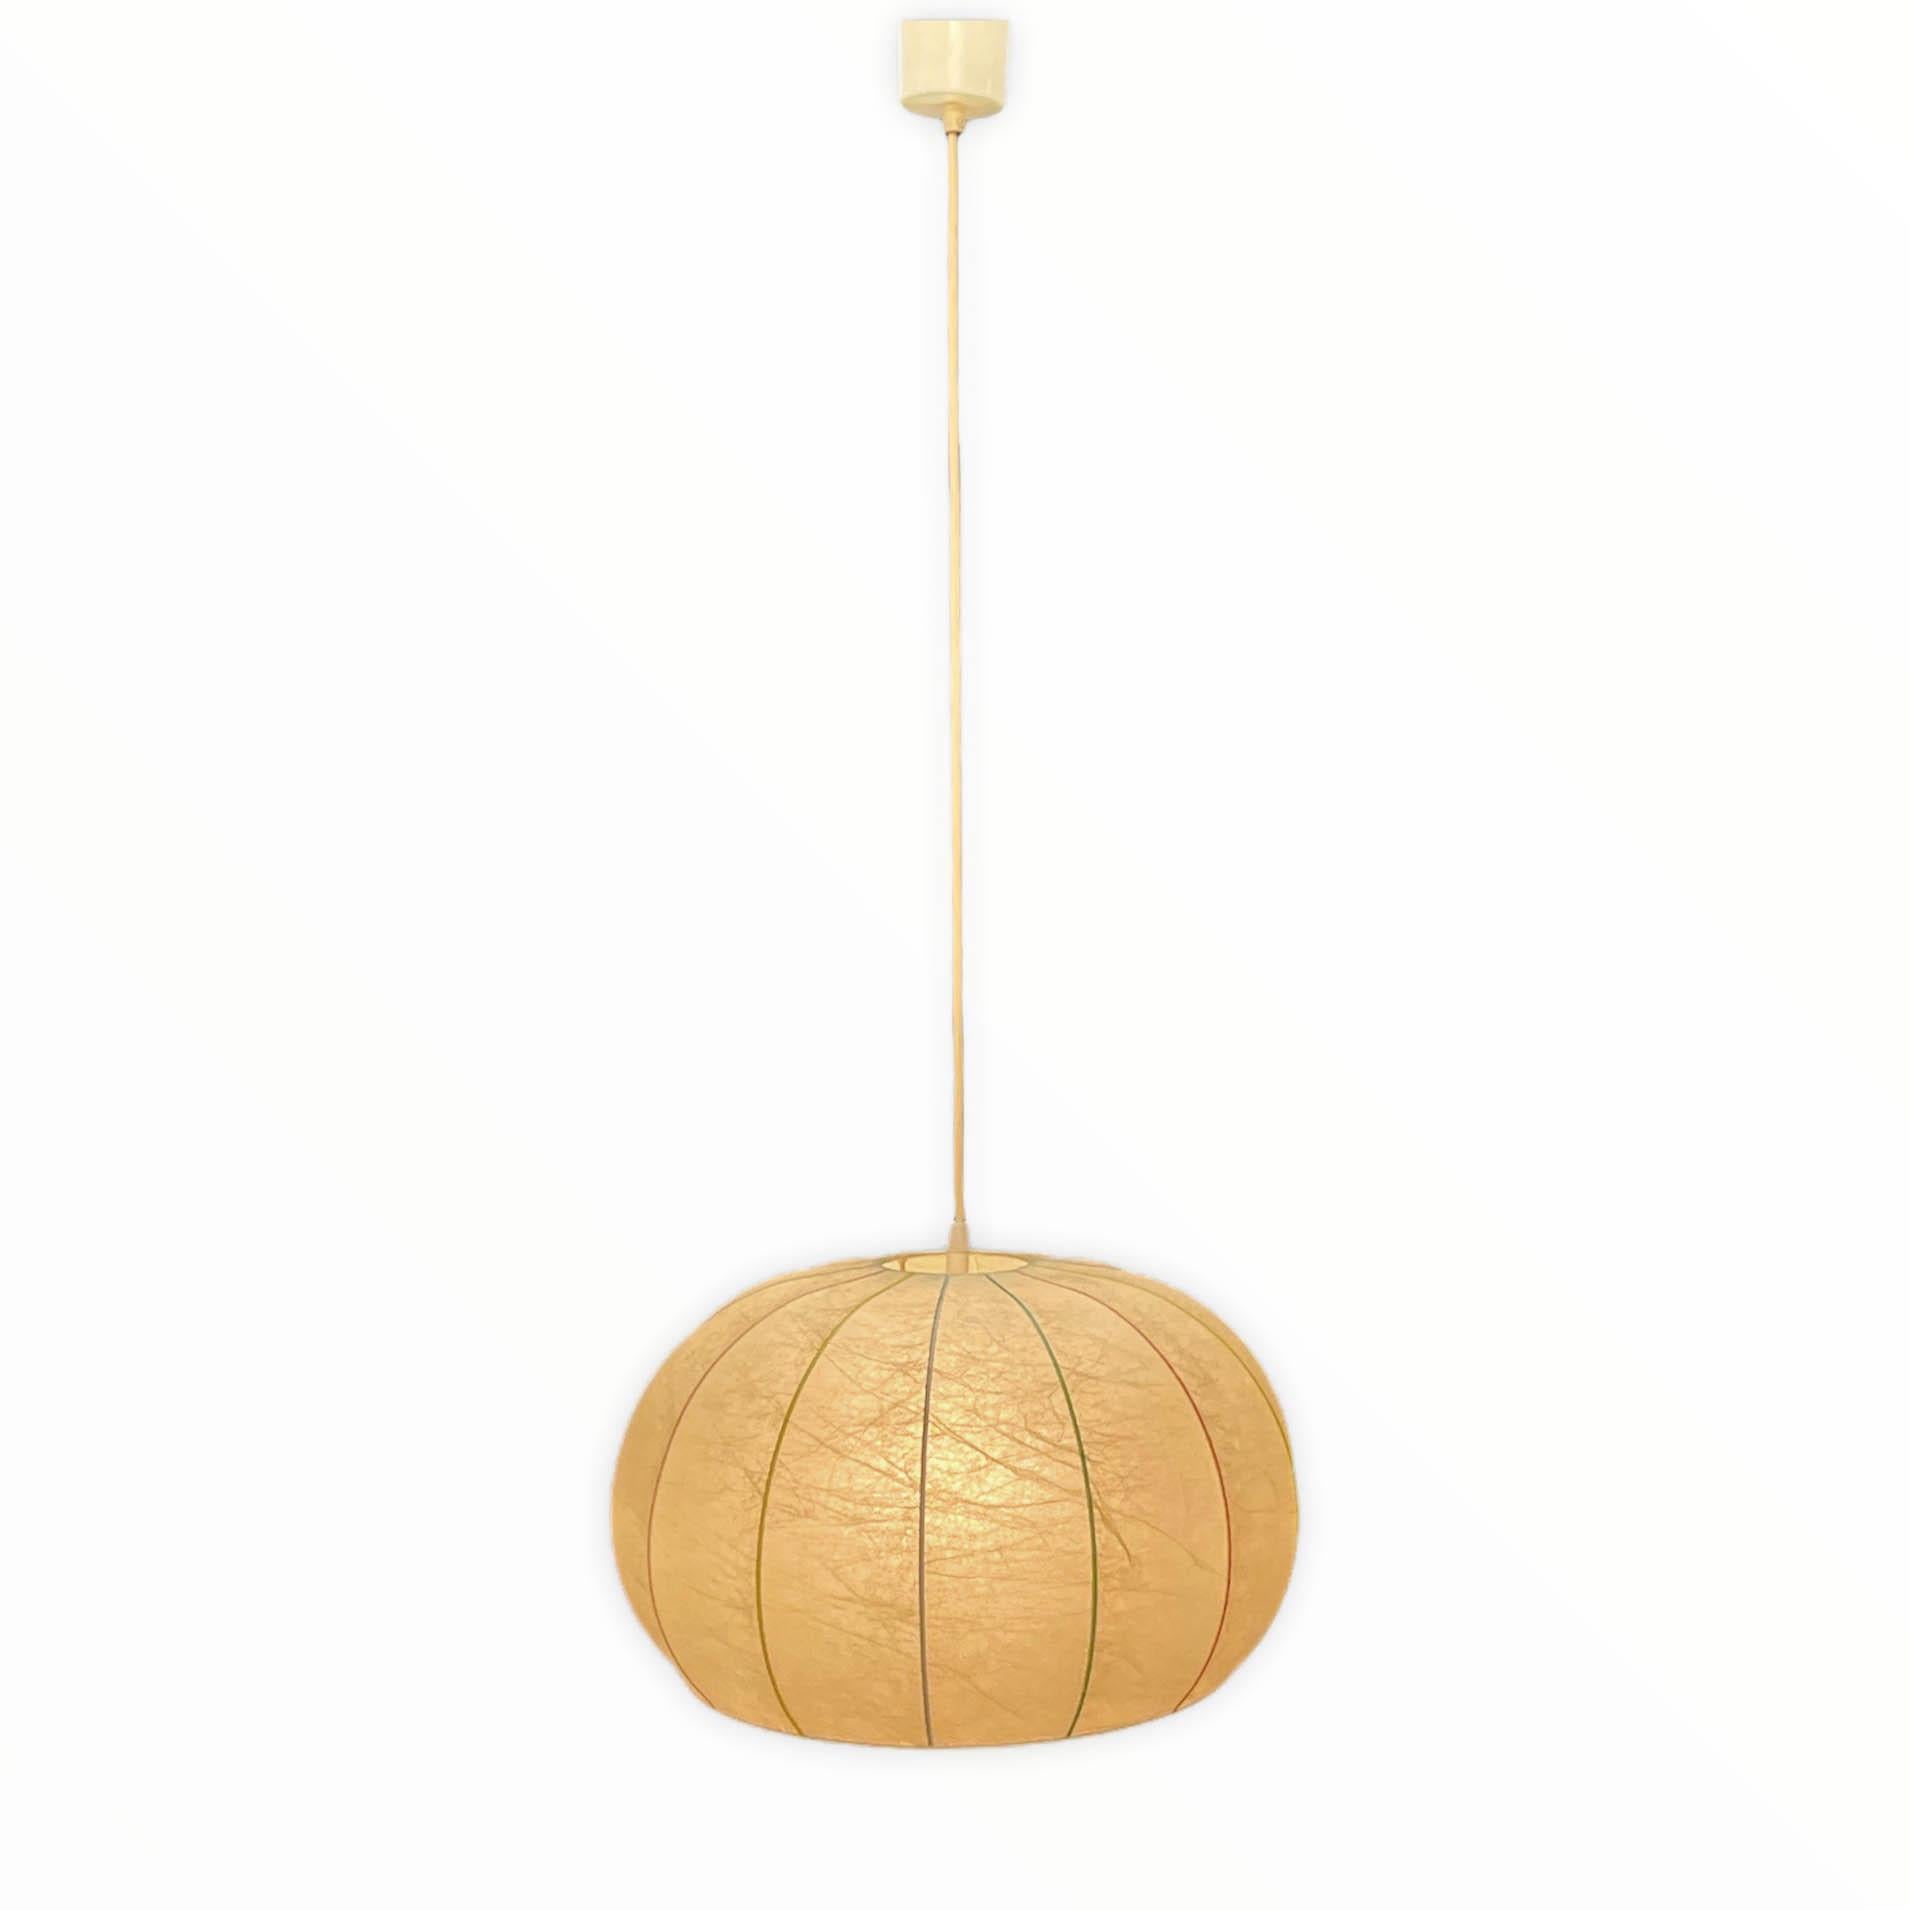 Incredible mid-century resin and metal 'Cocoon' chandelier. The metal structure is colored in yellow, red, green and blue. This wonderful pendant lamp was designed by Achille Castiglioni in Italy in the 1960s.

This fantastic piece features a